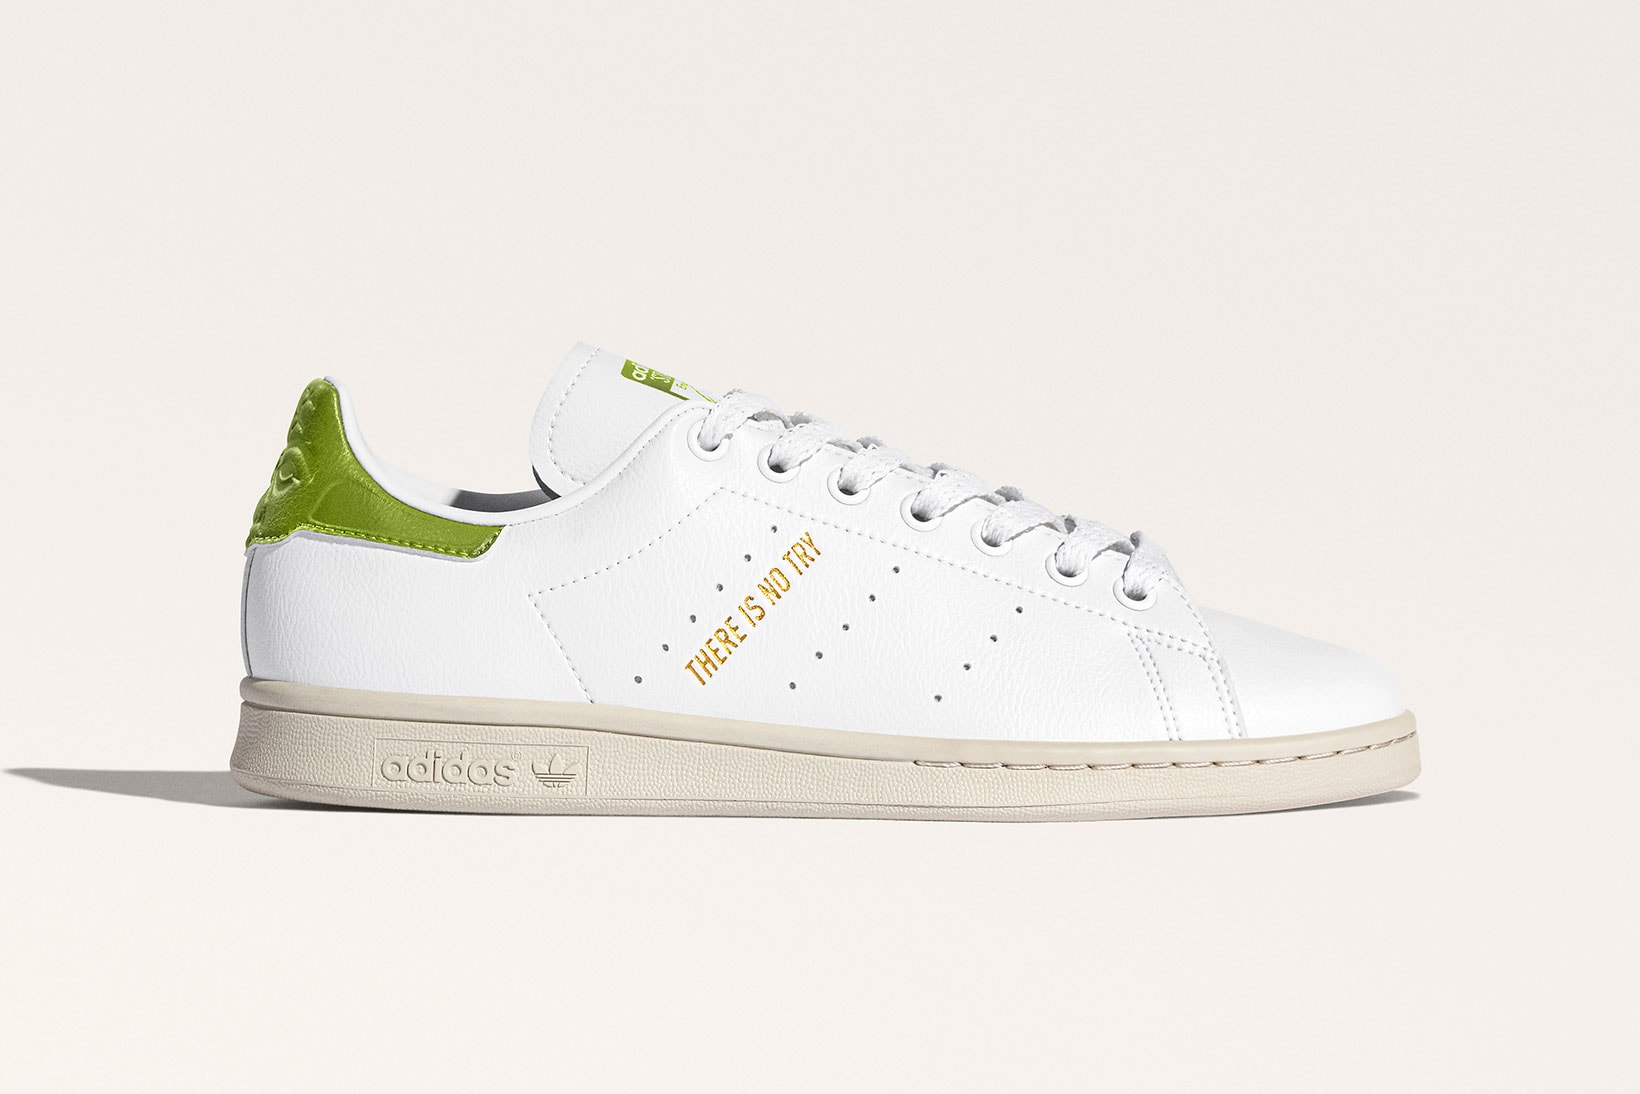 adidas originals stan smith star wars yoda collaboration sustainable sneakers green white footwear kicks shoes sneakerhead lateral